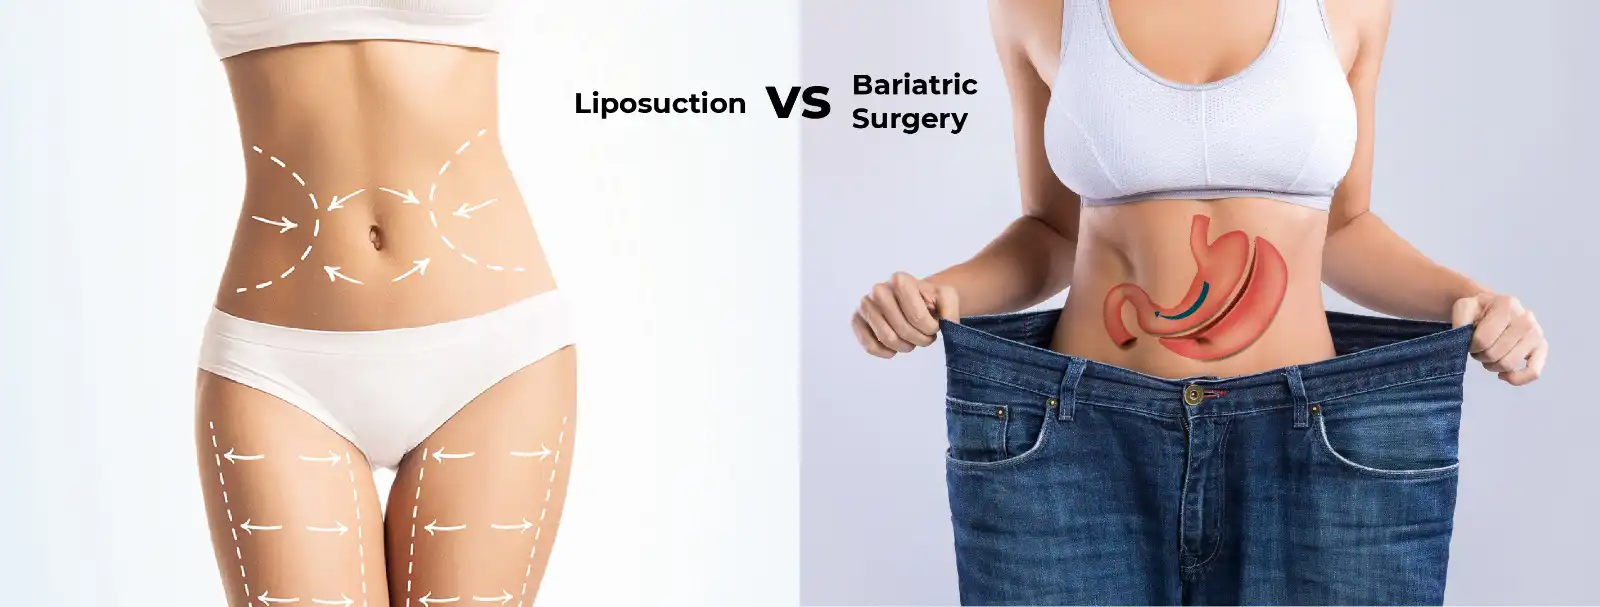 Liposuction vs. Weight Loss Surgery - What are The Differences?